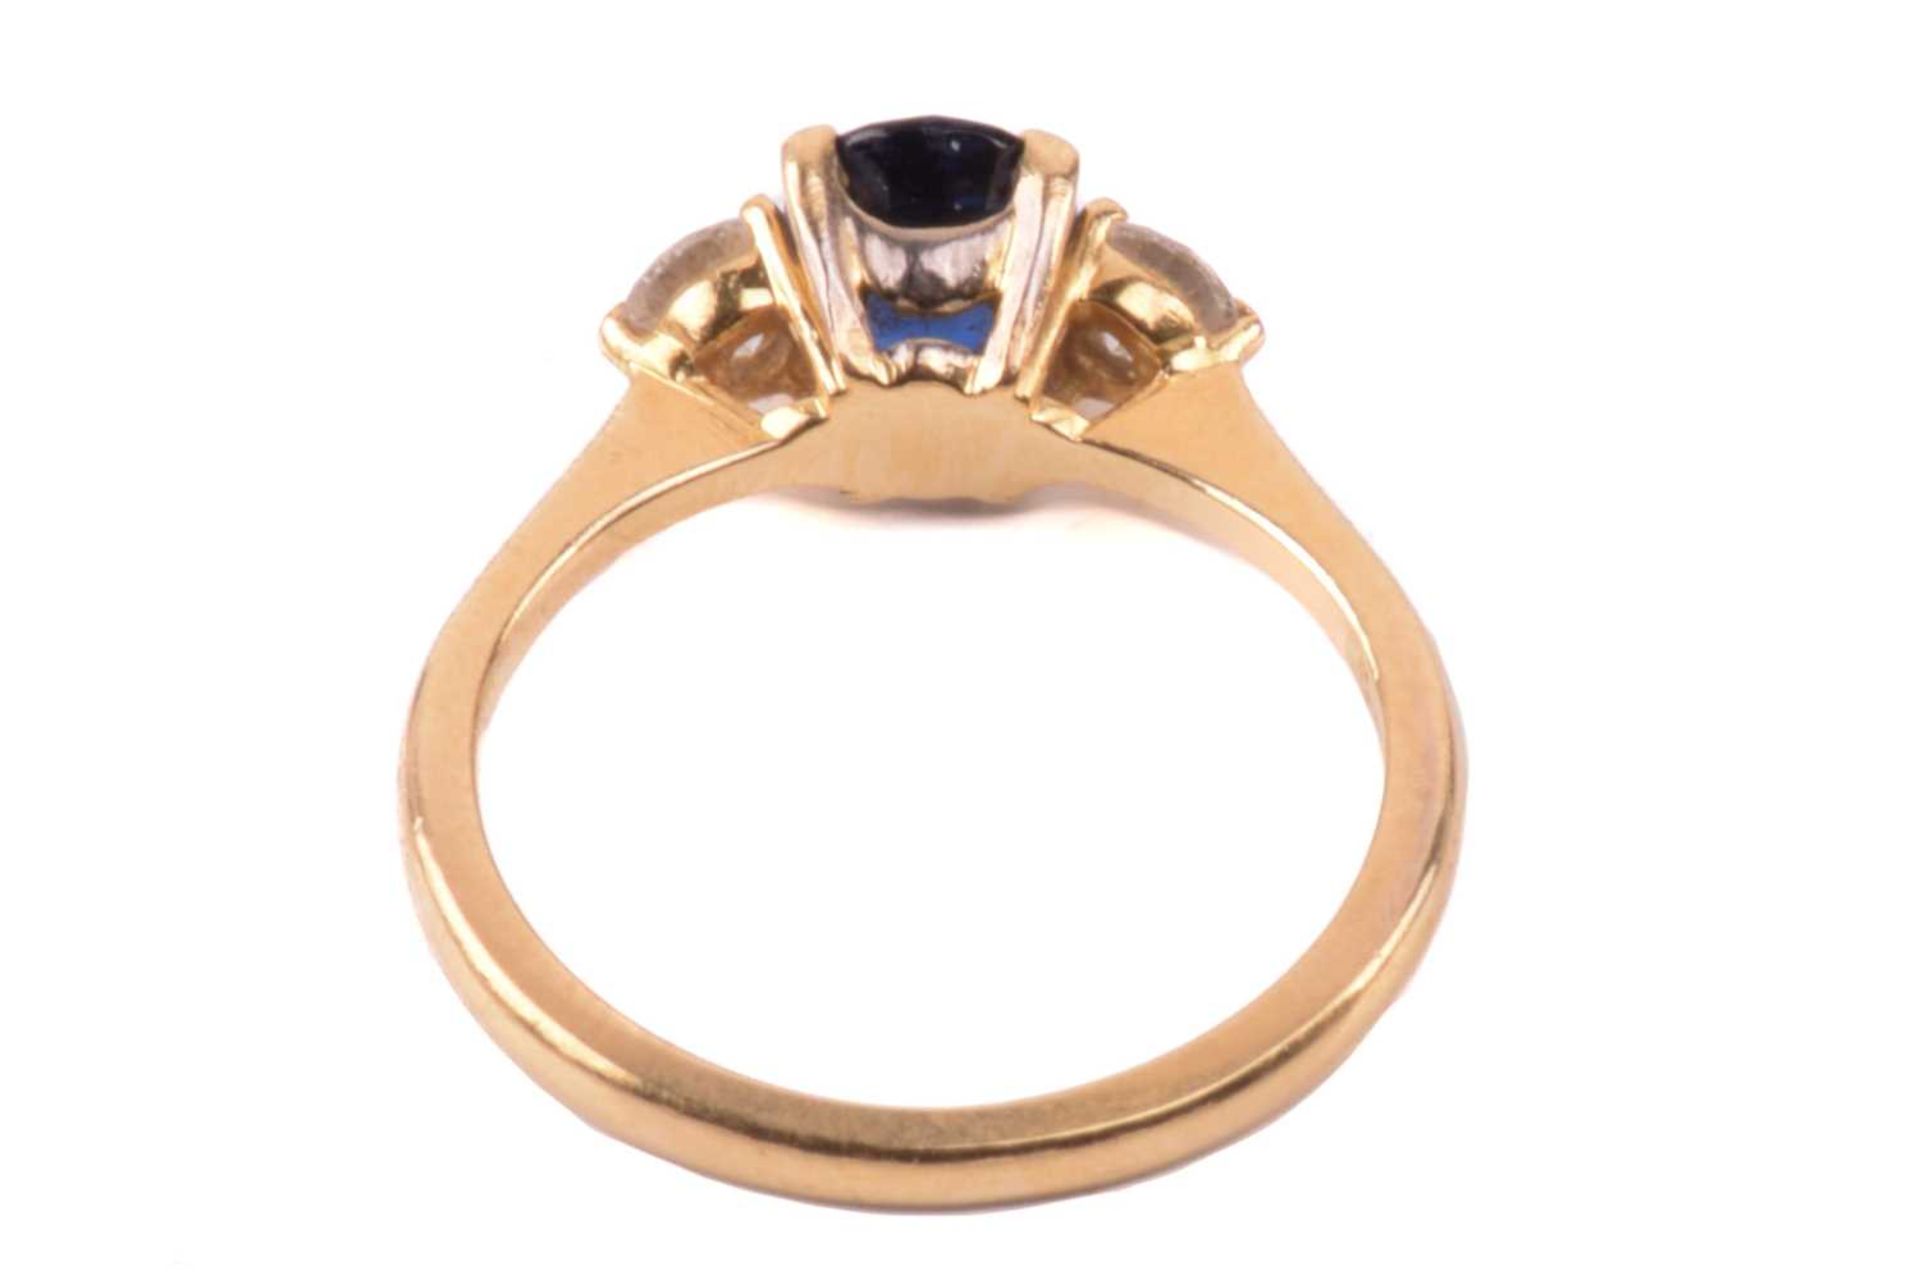 A Boodle & Dunthorne sapphire and diamond three stone ring, set with a central oval sapphire - Image 6 of 6